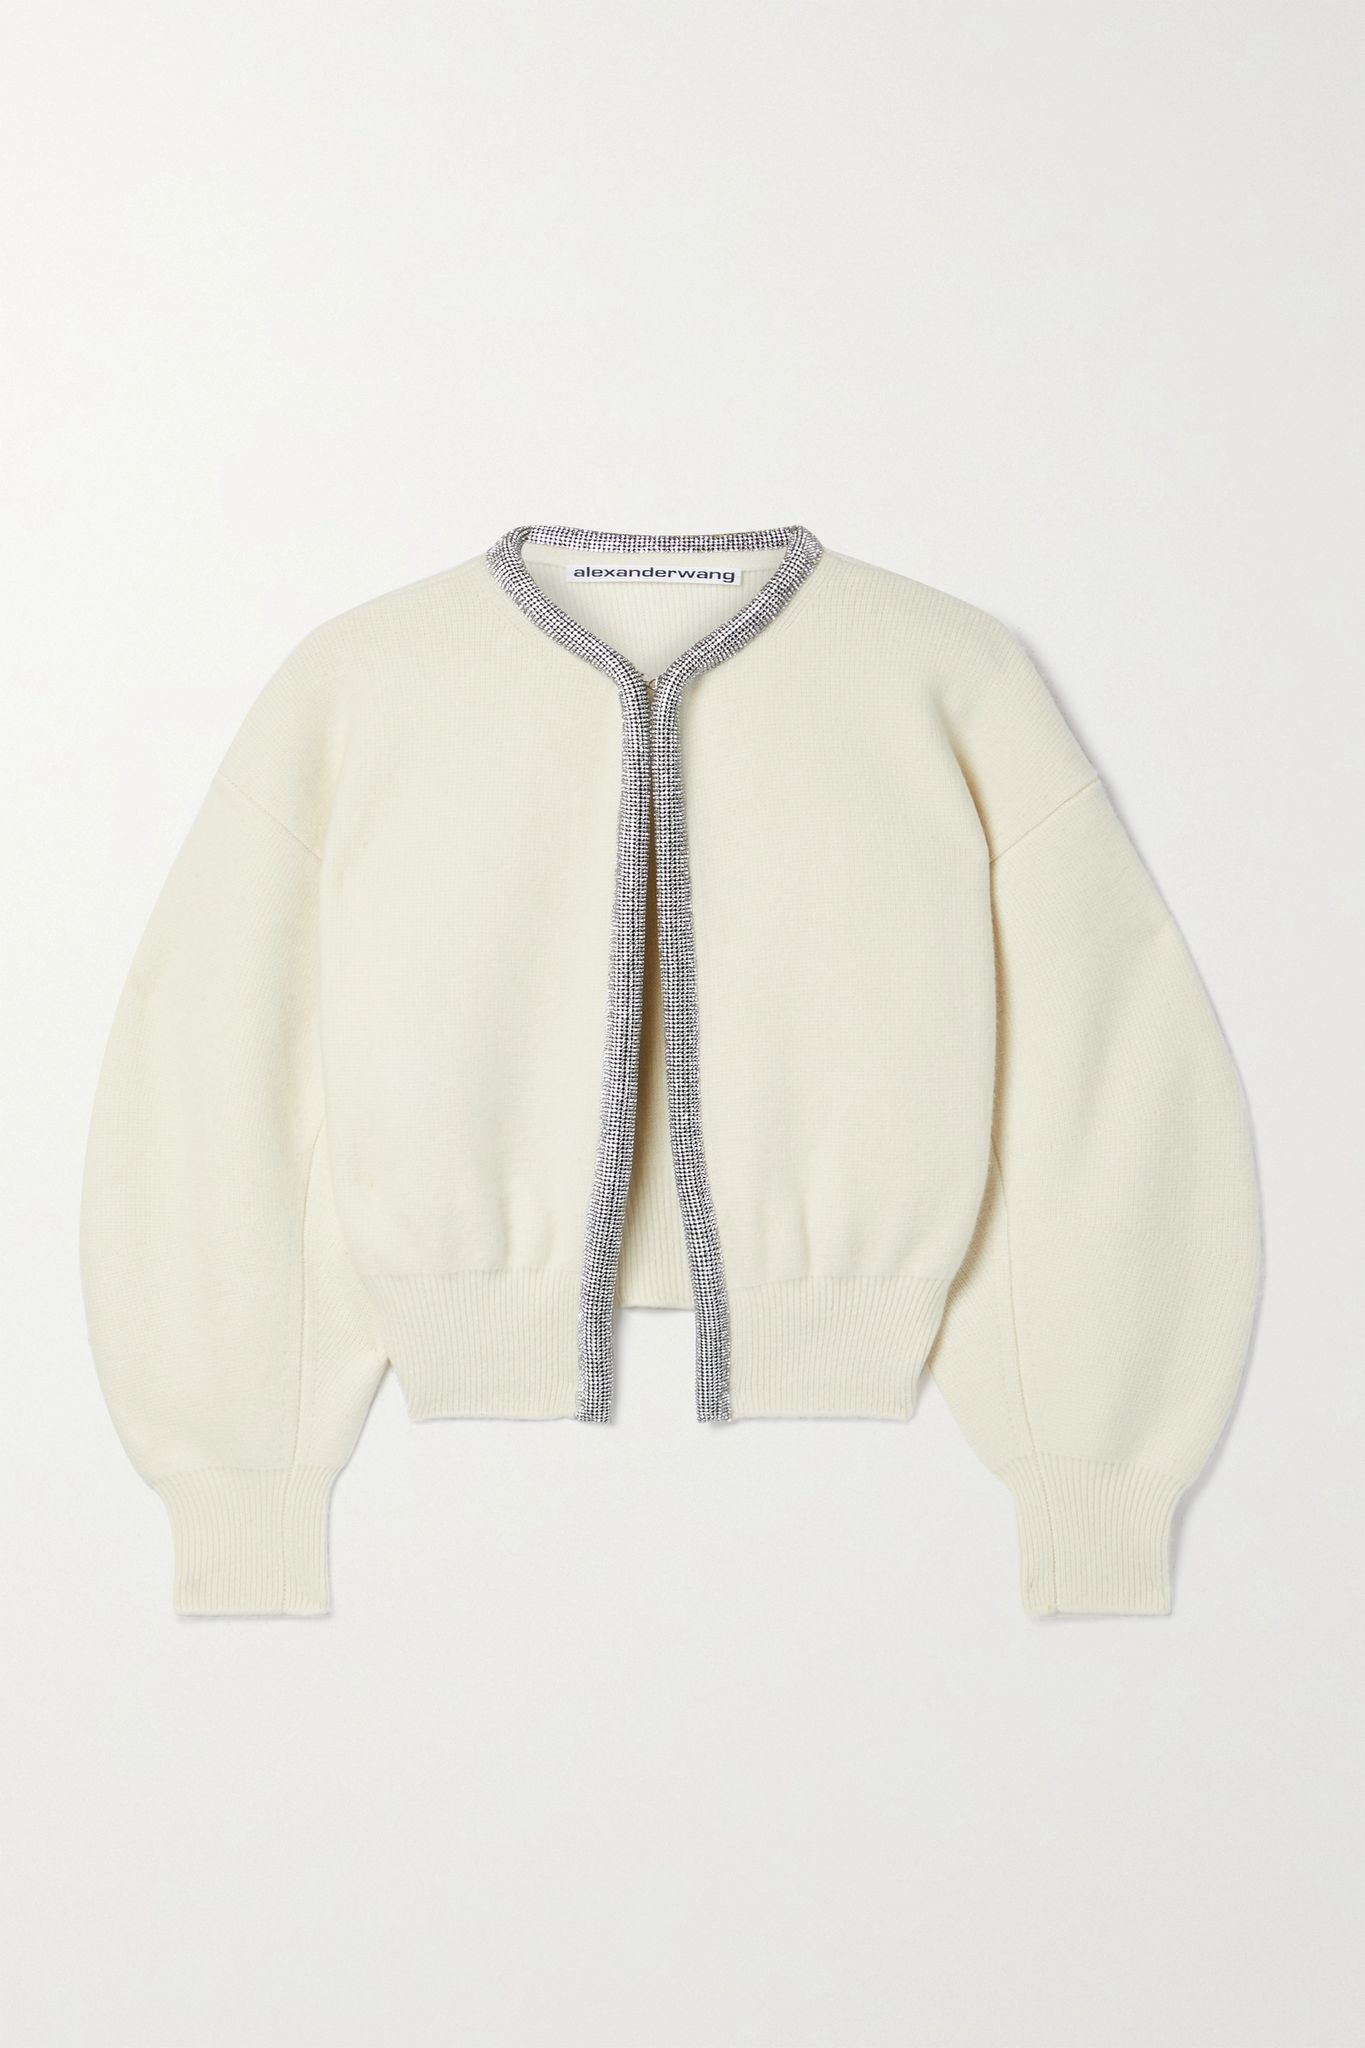 29 of the Best Party-Ready Statement Knitwear Buys | Who What Wear UK